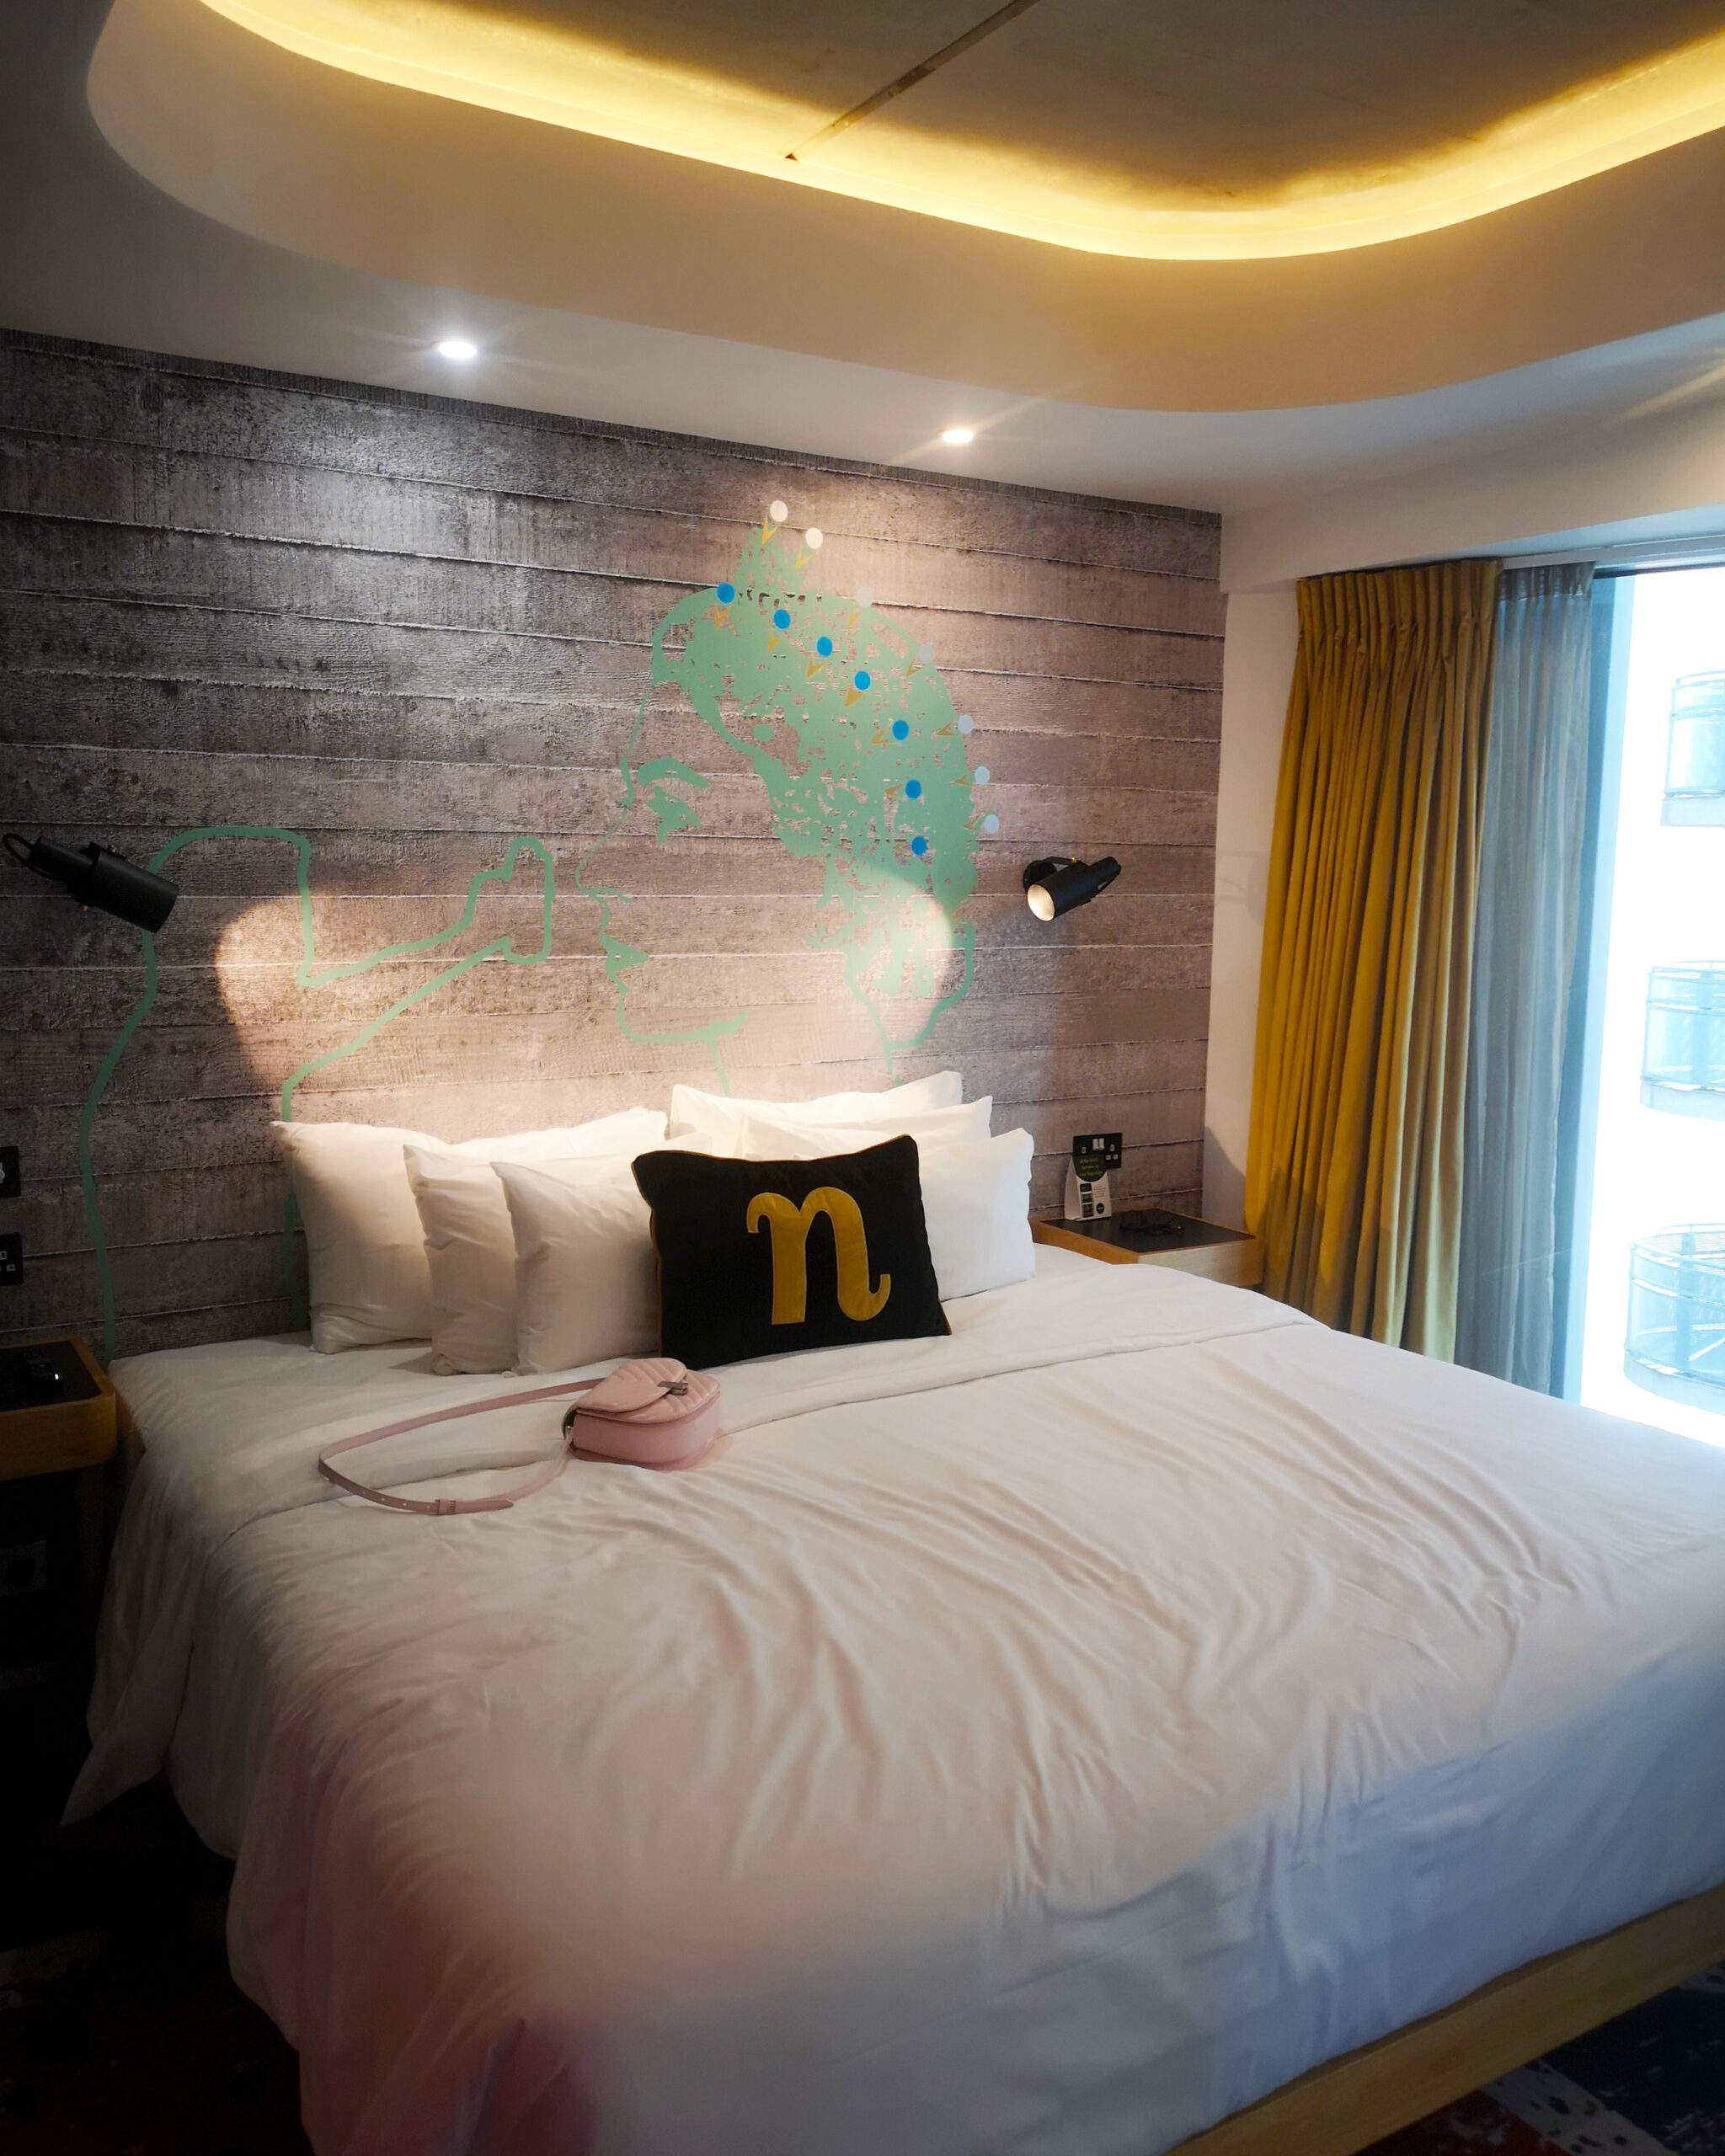 Nhow London, London Hotel, Hotel Review, London, Family Stay, London Weekend, Family-Friendly, Modern Hotel, the Frenchie Mummy, Days Out, Press Trip, London Break, Staycation, Hotel Stay